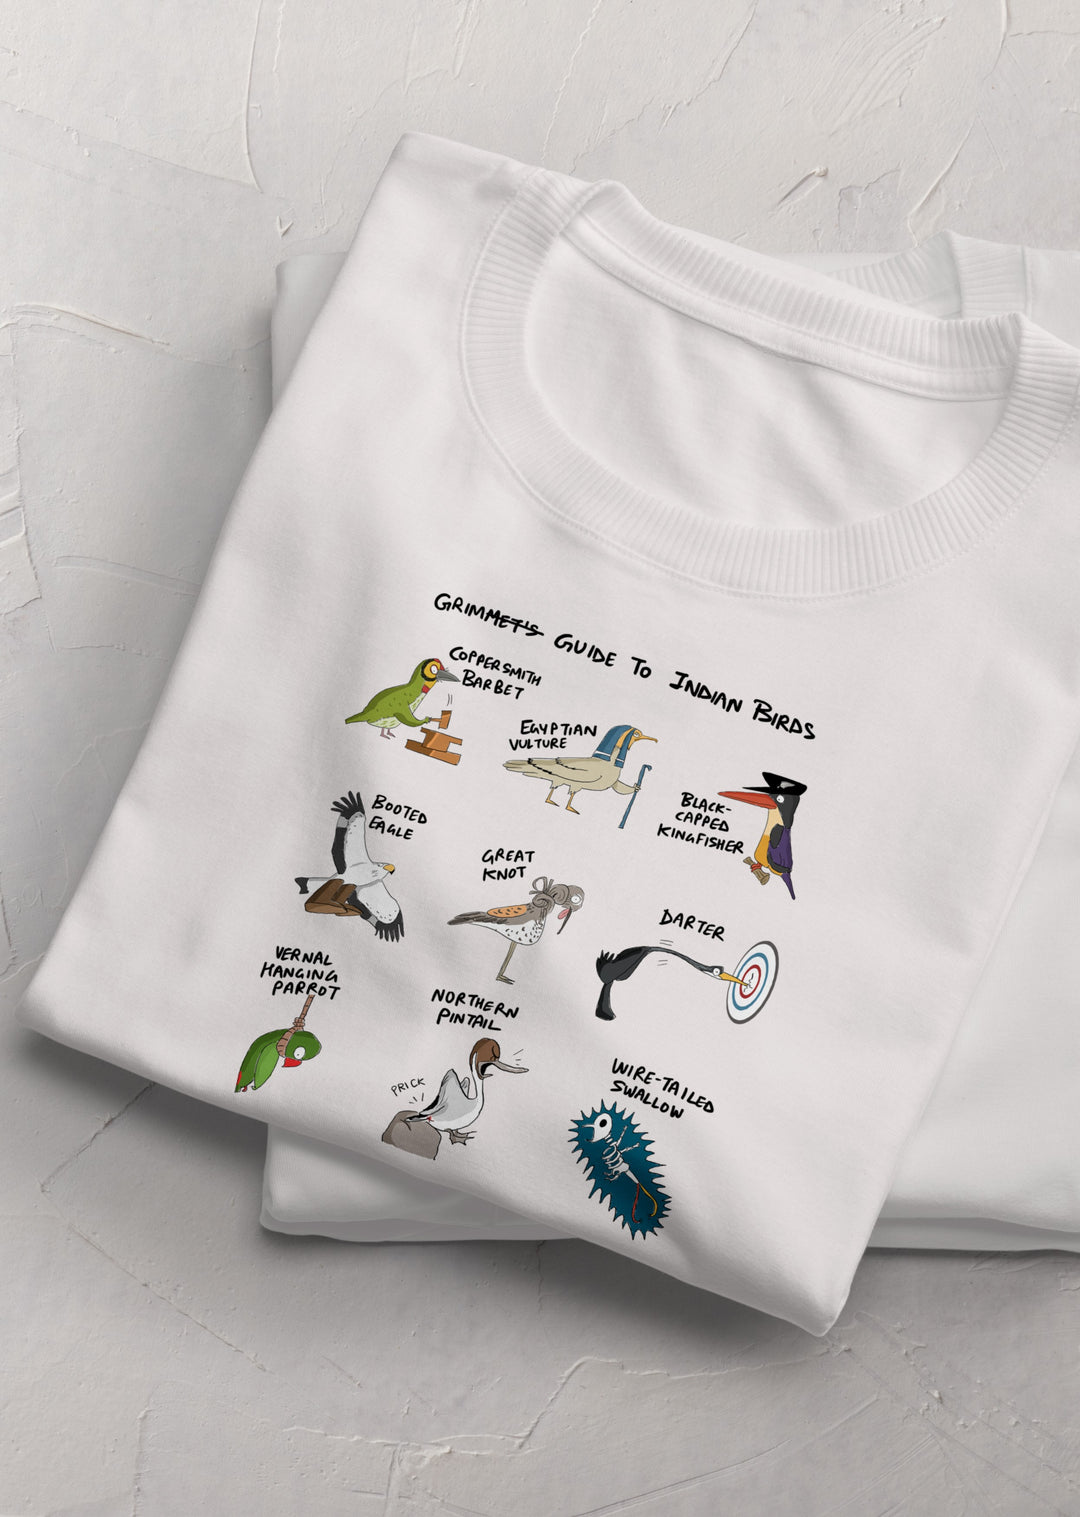 Grim Guide to Indian Birds T-Shirt – Happy Wagon